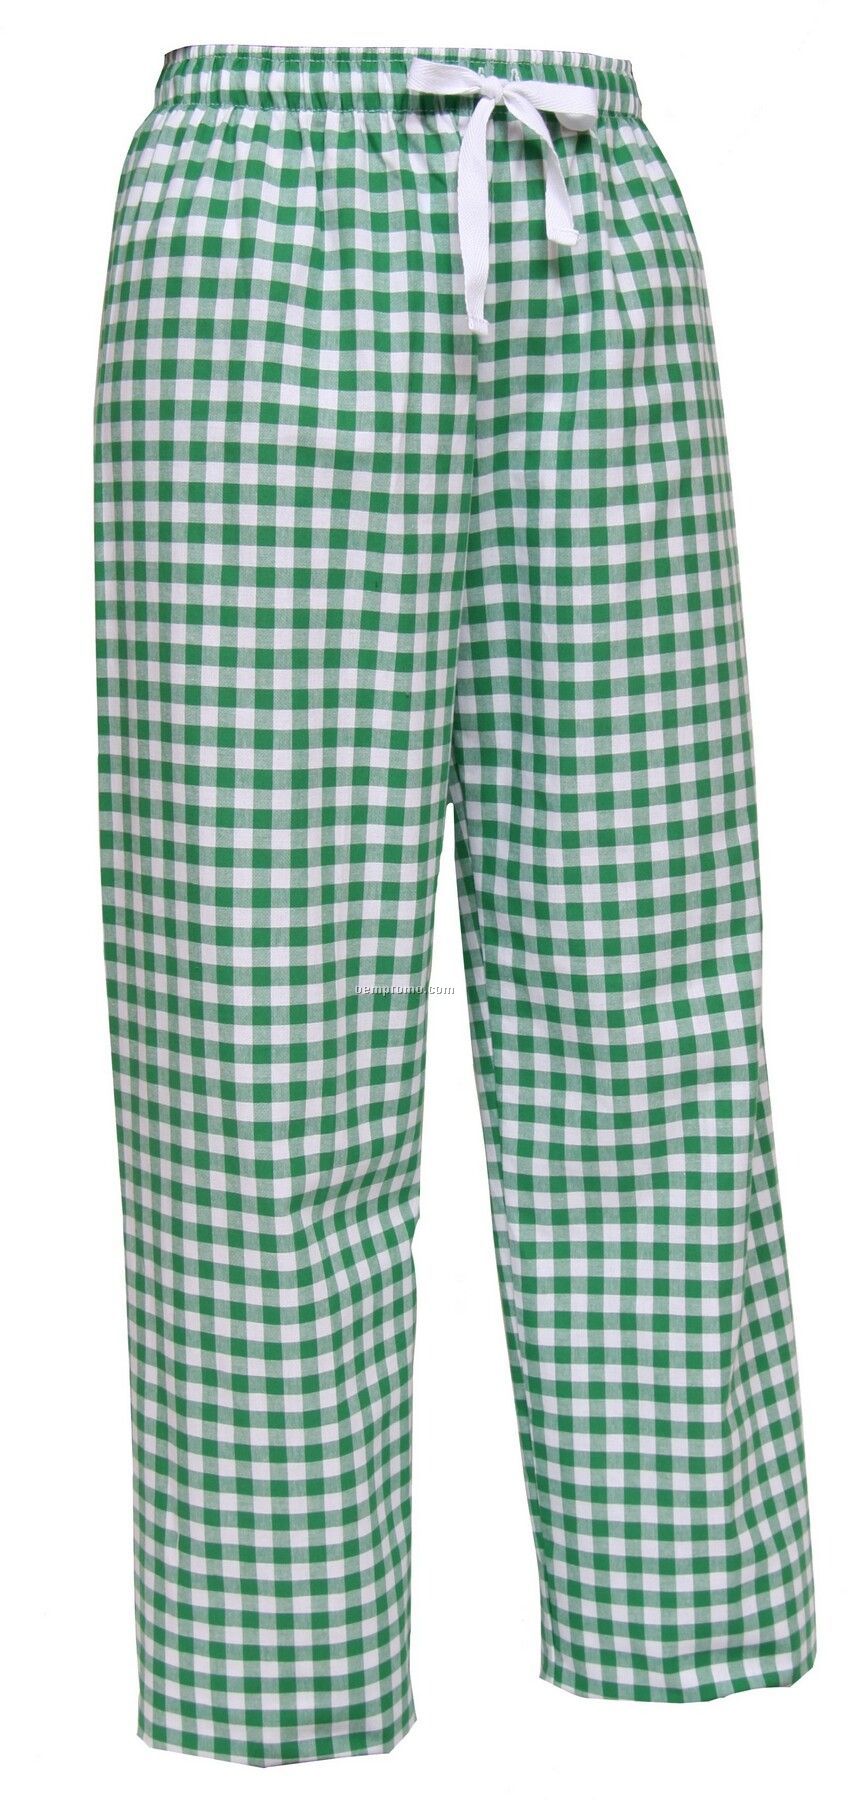 Youth Grassy Green Keep It Cool Pant